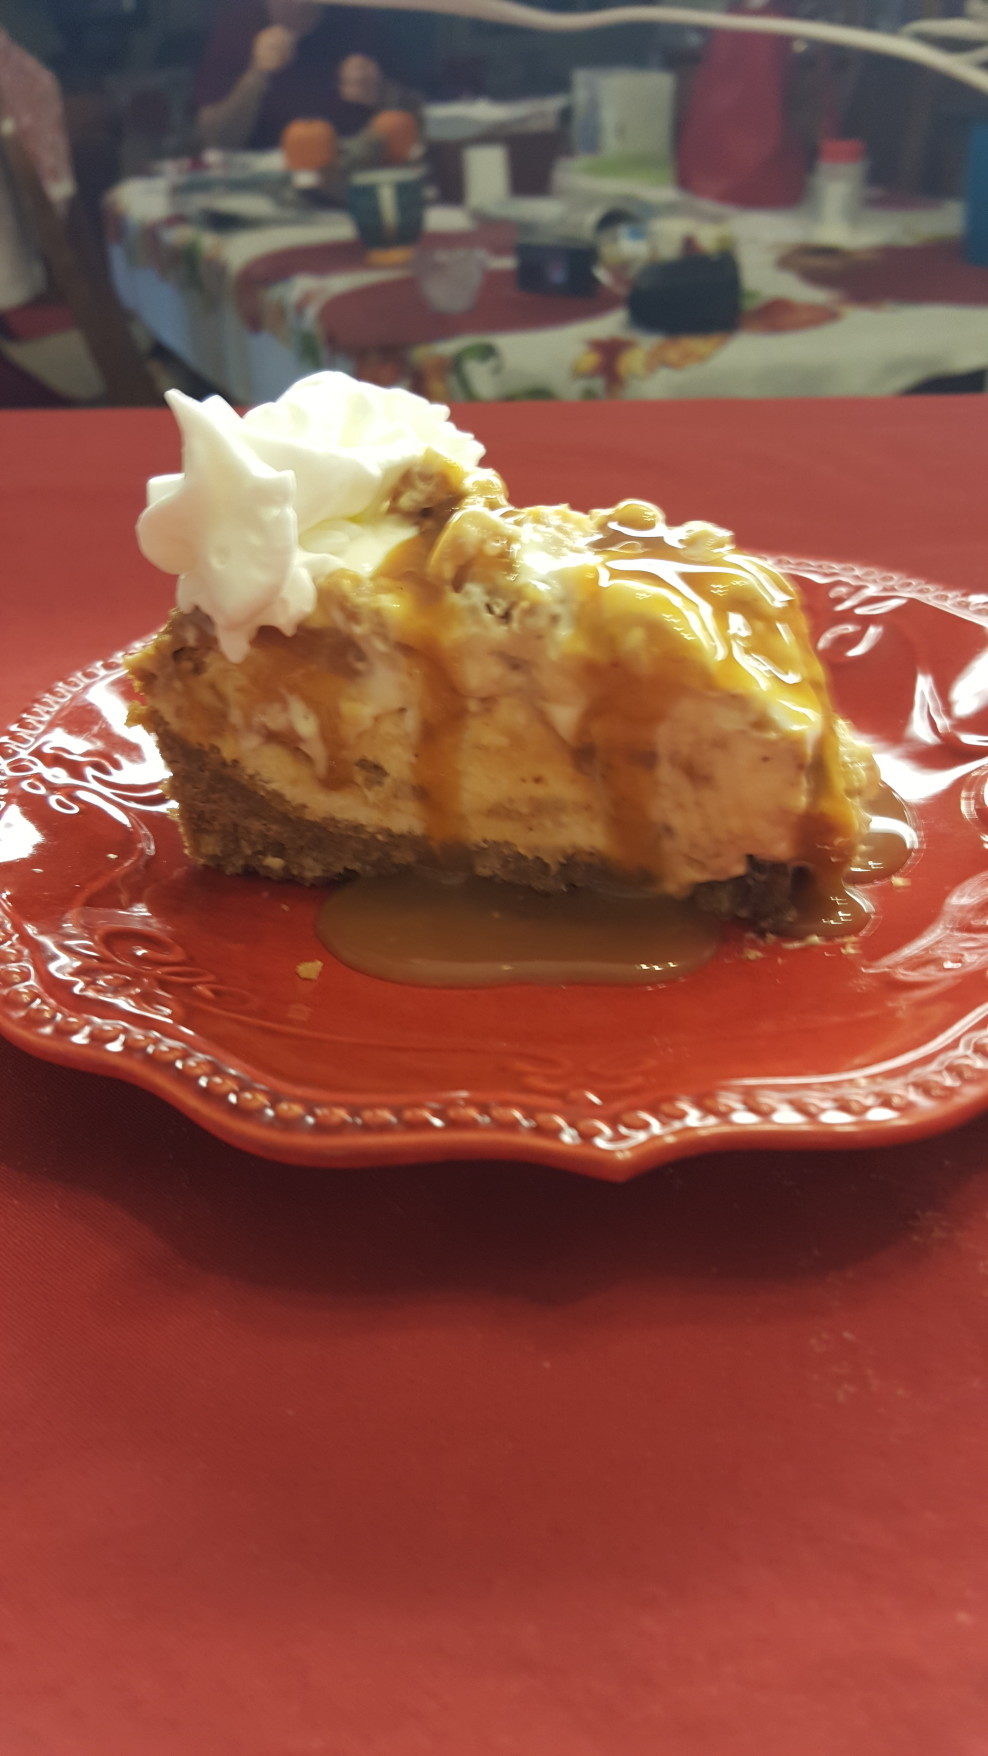 A red plate holding a piece of pie covered in whipped cream.